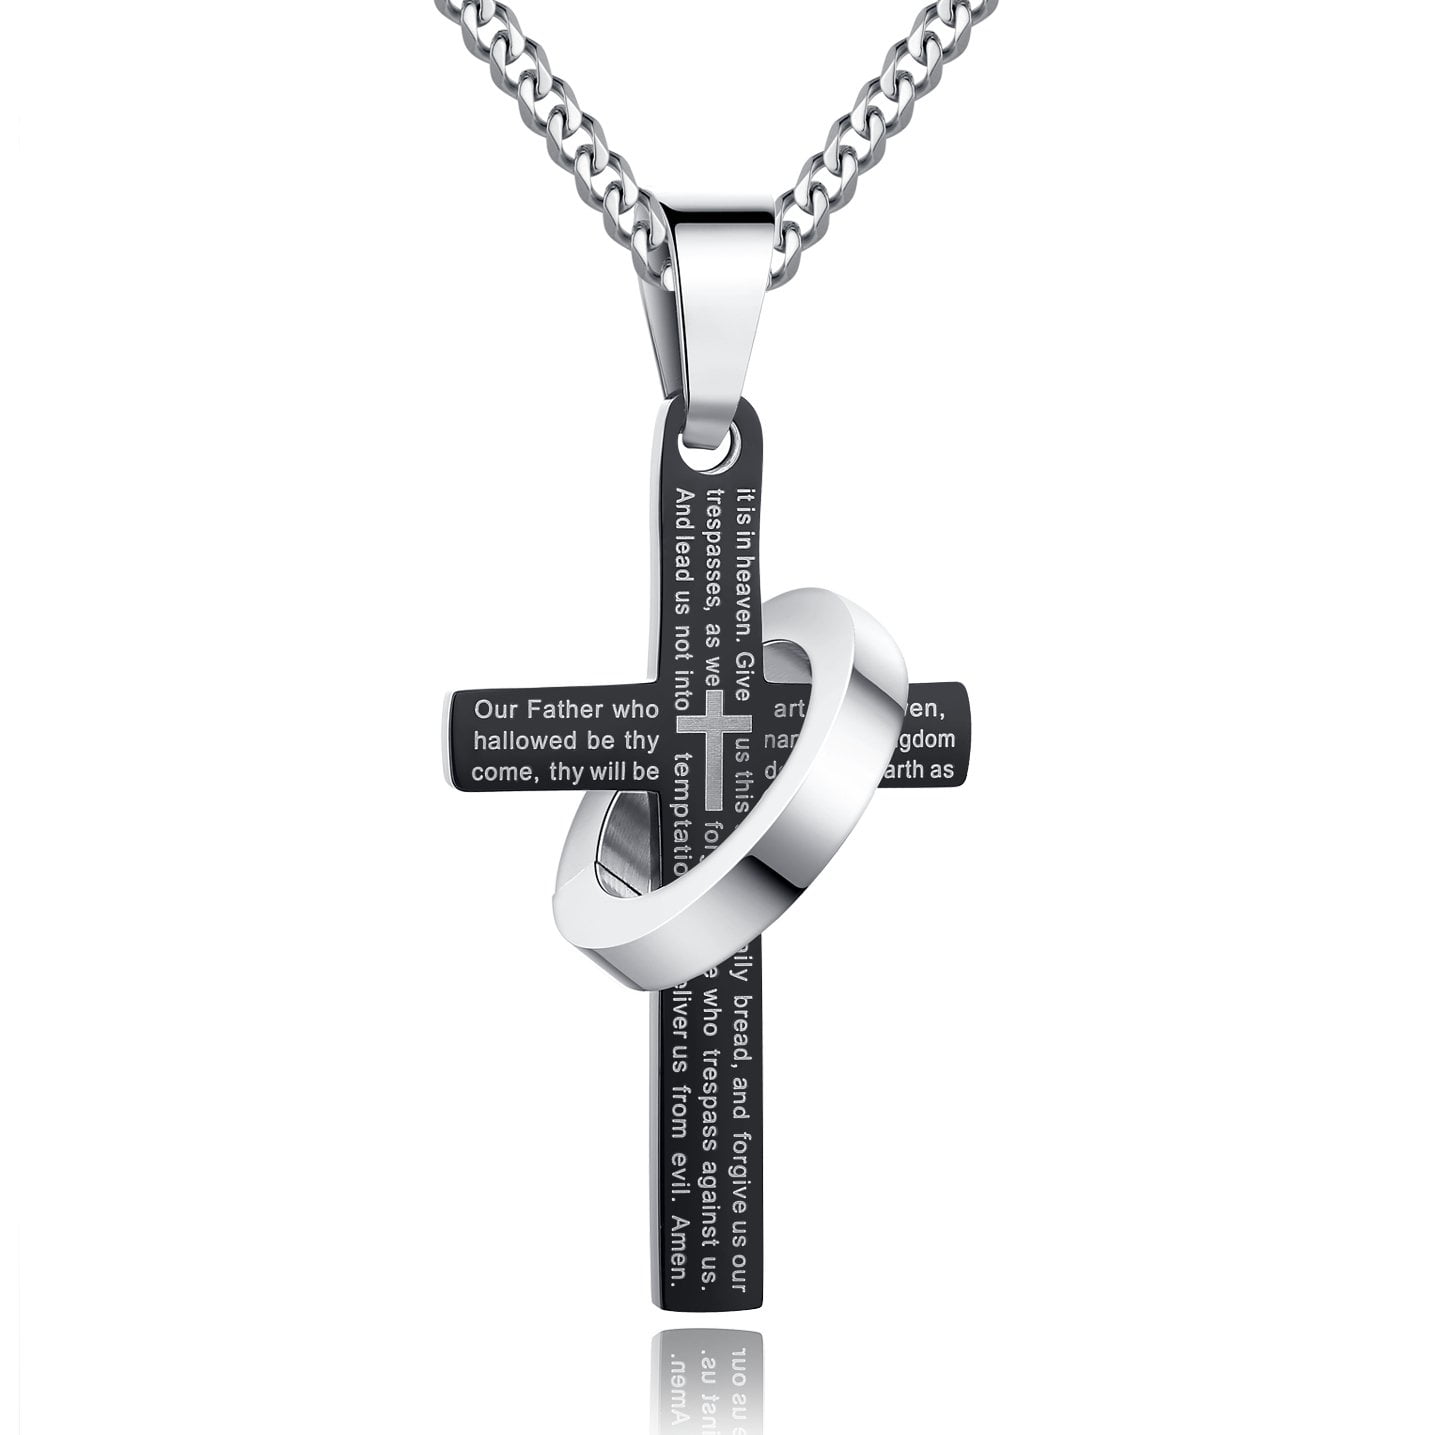 Men's Stainless Steel Large Layered Cross Bible Lord's Prayer Pendant Necklace 